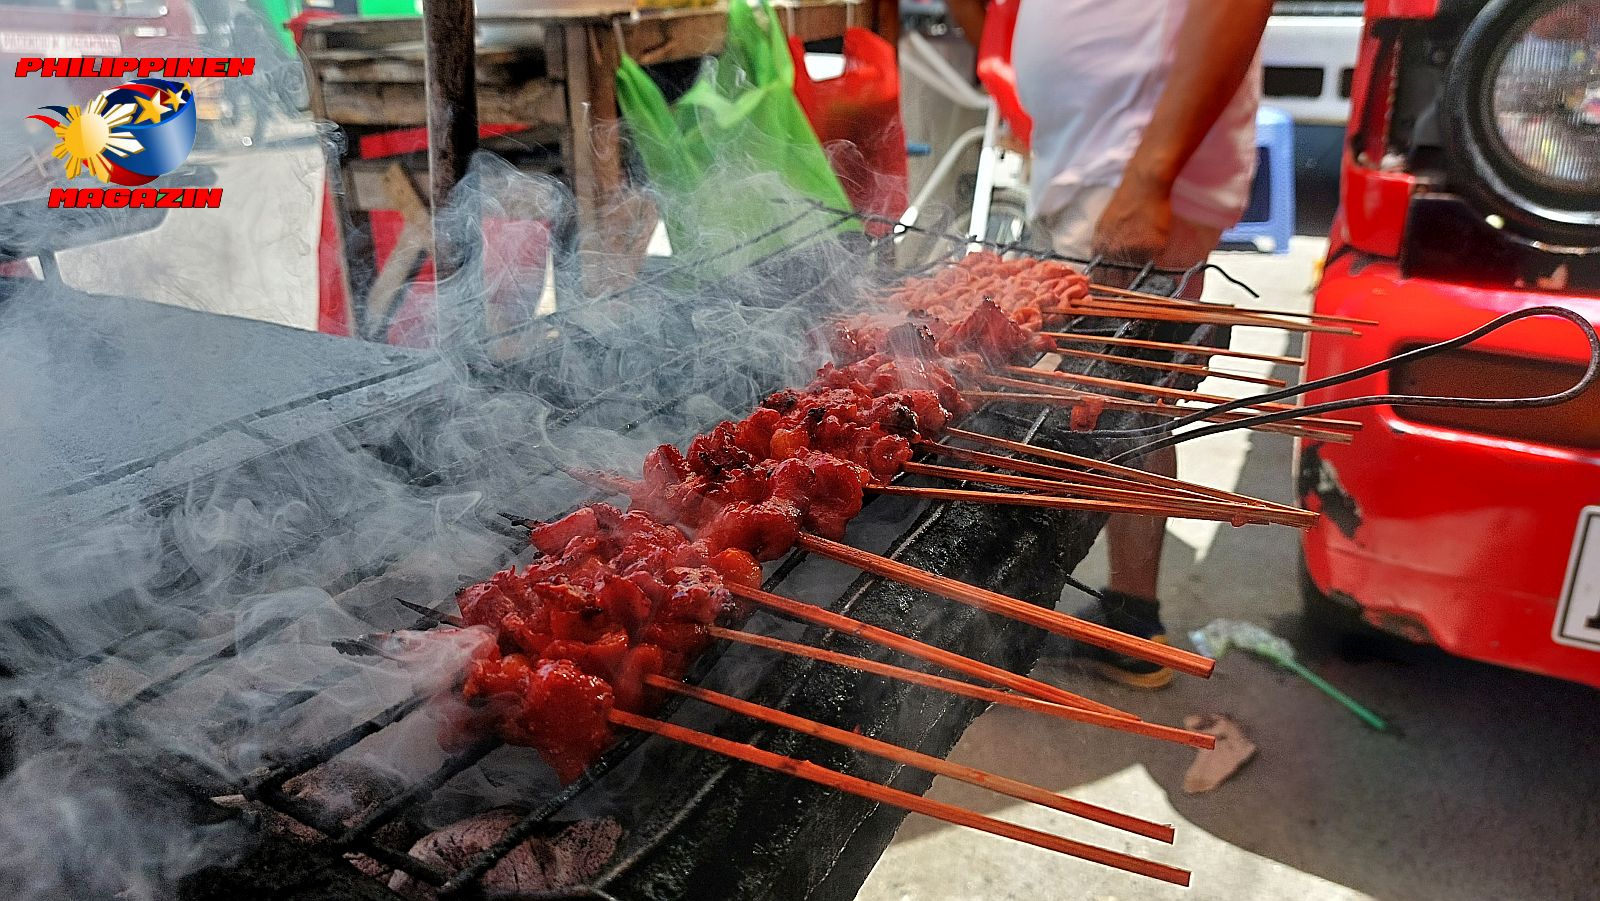 SIGHTS OF CAGAYAN DE ORO CITY & NORTHERN MINDANAO - IMAGE OF THE DAY - Smoke is the Trademark of Street Grills